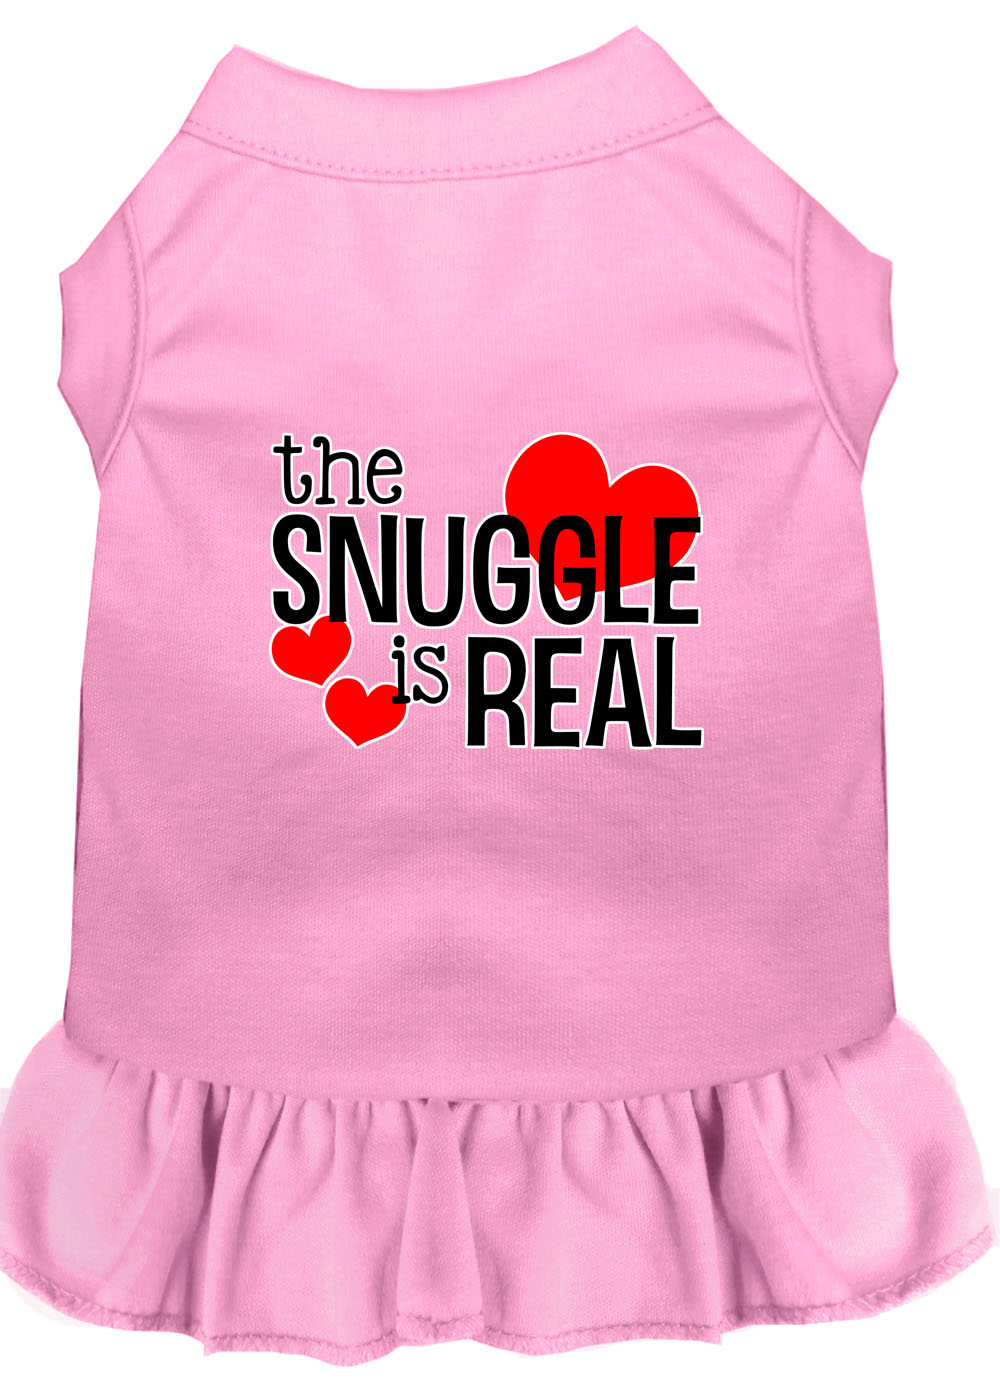 The Snuggle is Real Screen Print Dog Dress Light Pink XL